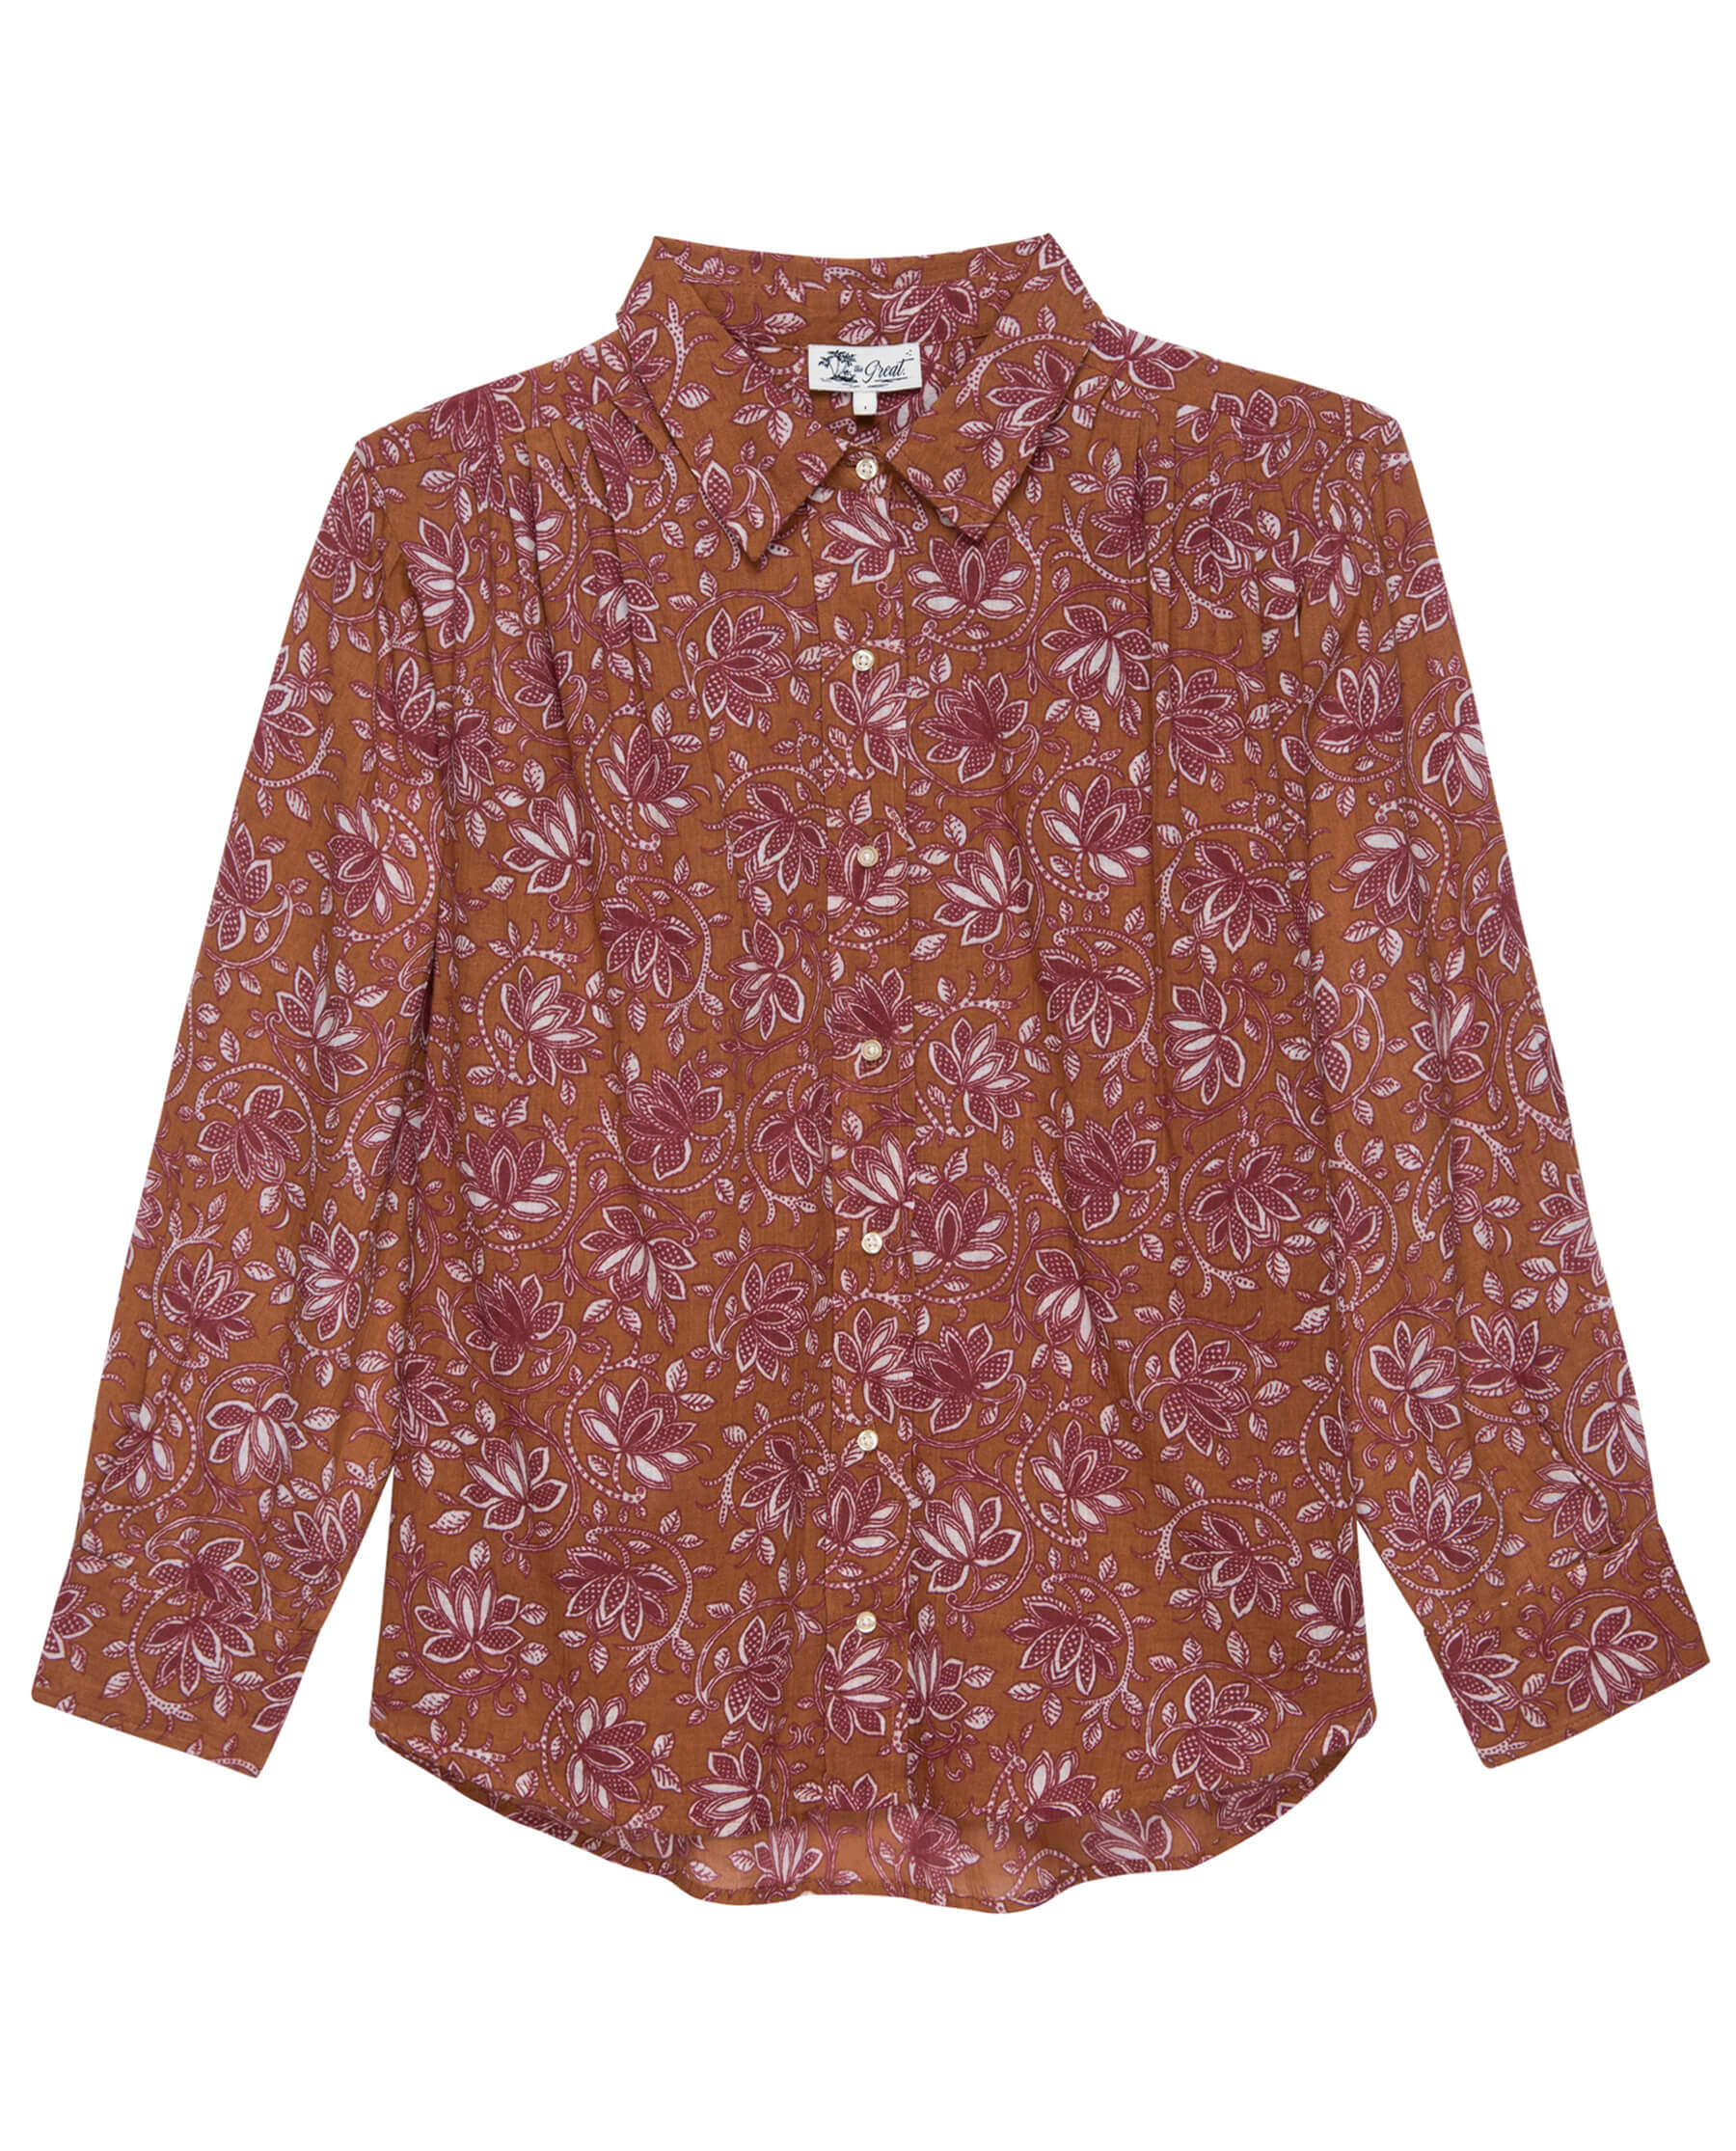 The Cove Shirt. -- Golden Sand Oasis Floral COVER-UP SHIRTS THE GREAT. SP24 SWIM